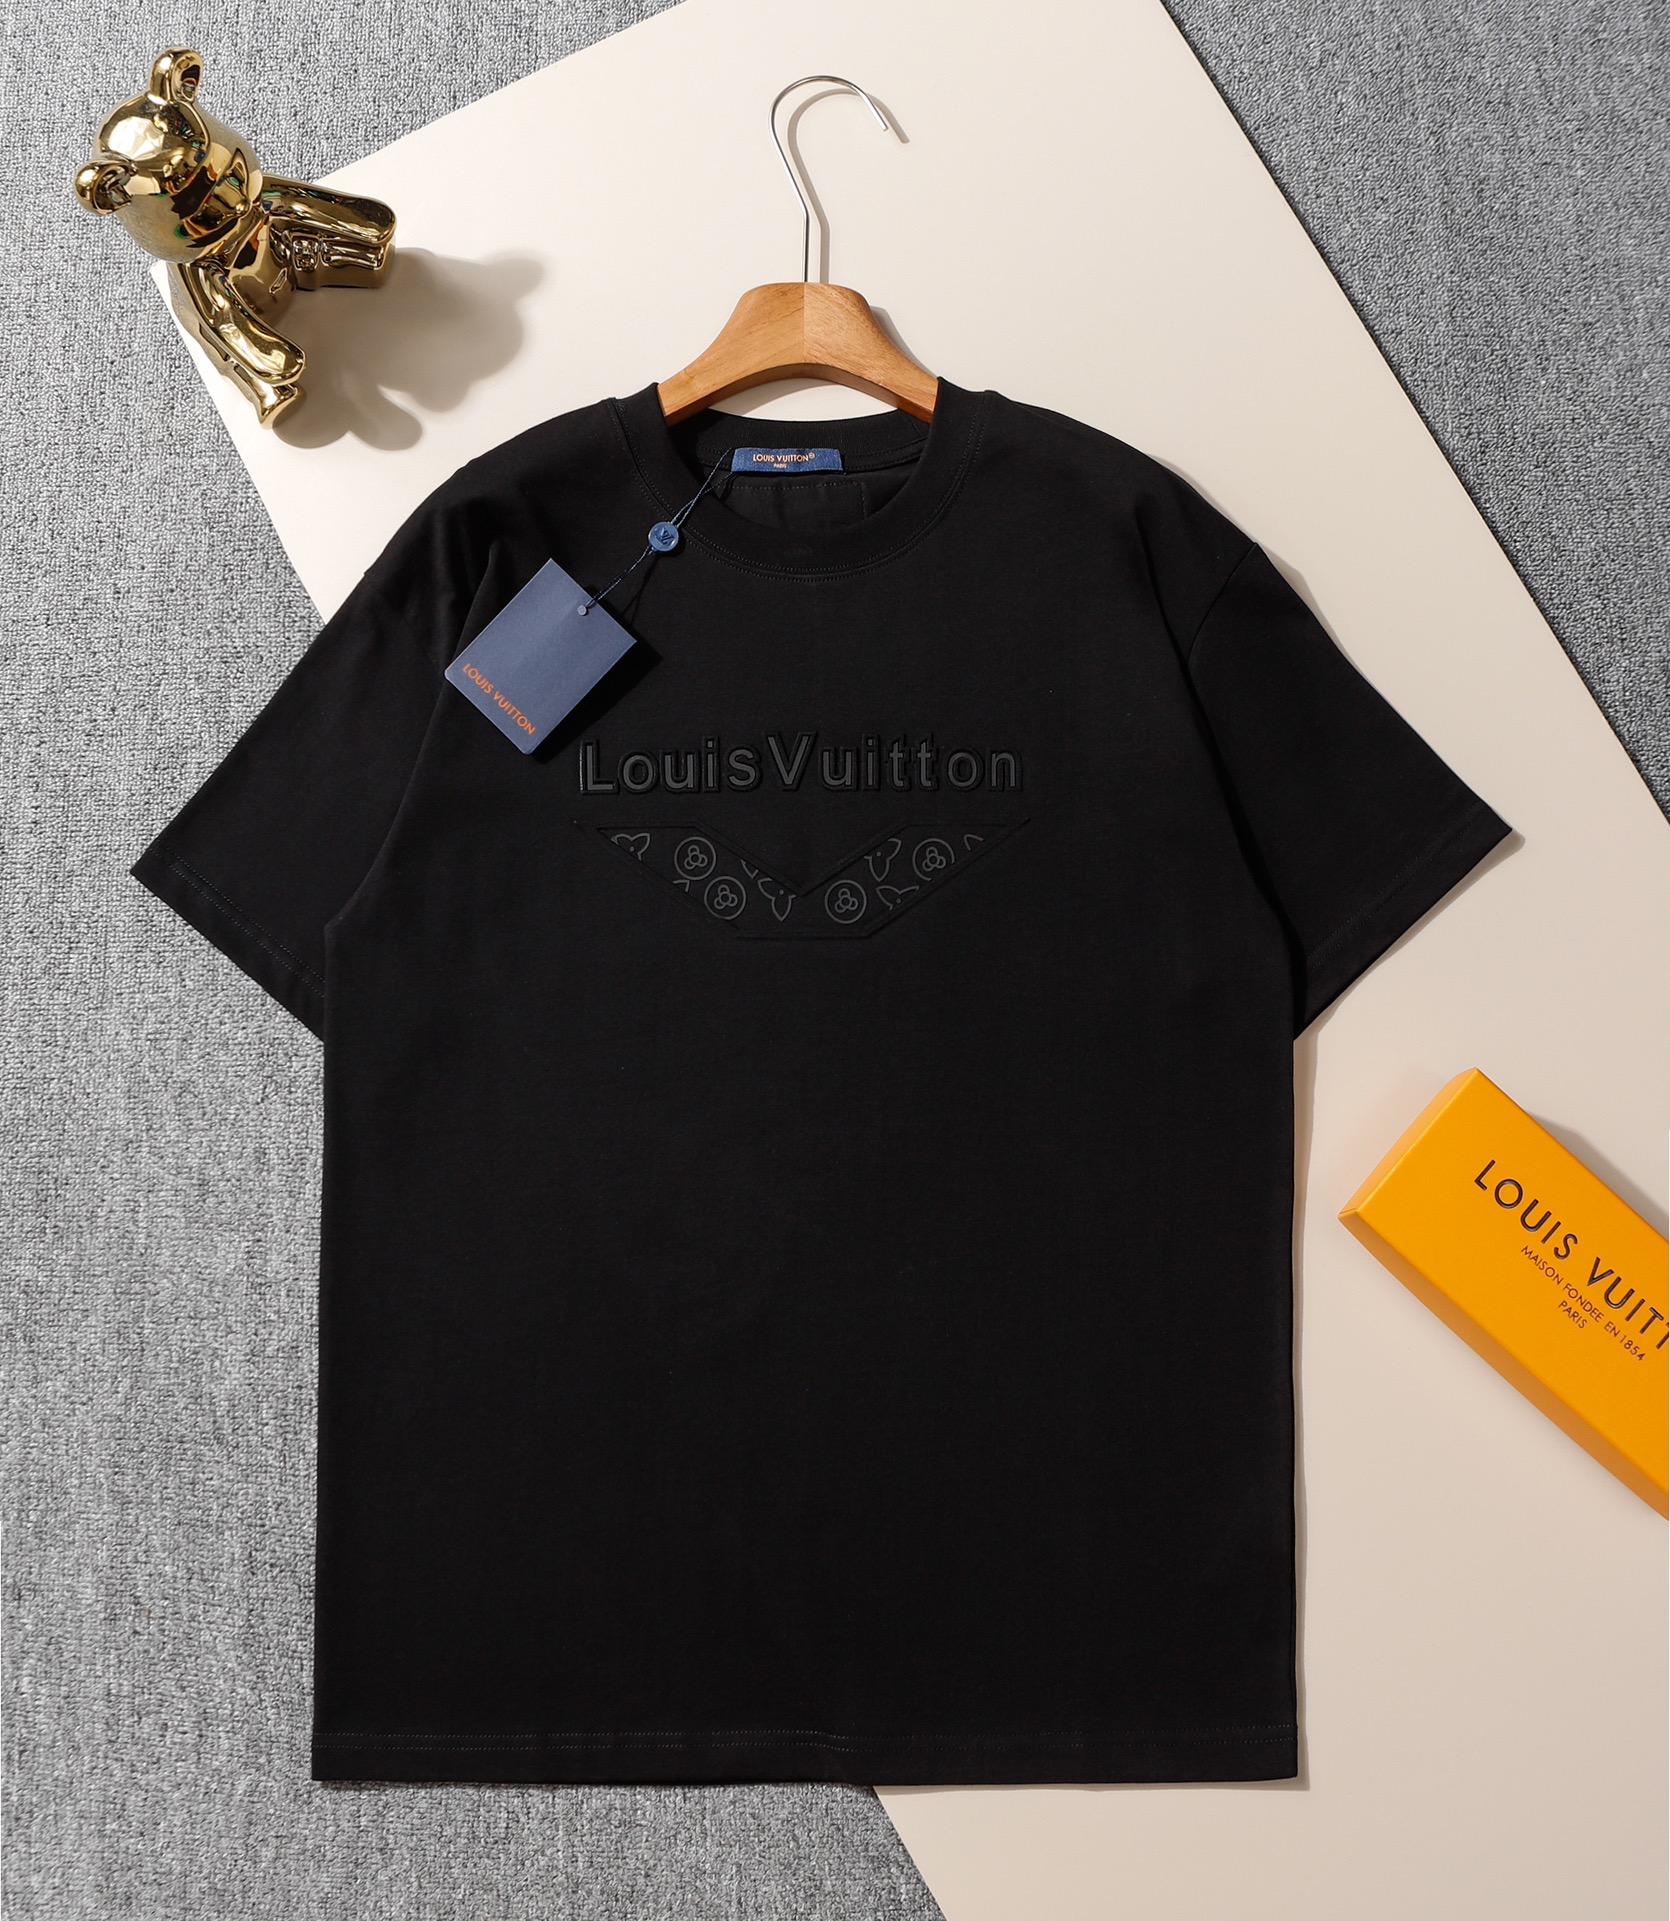 Louis Vuitton Clothing T-Shirt Embroidery Cotton Short Sleeve